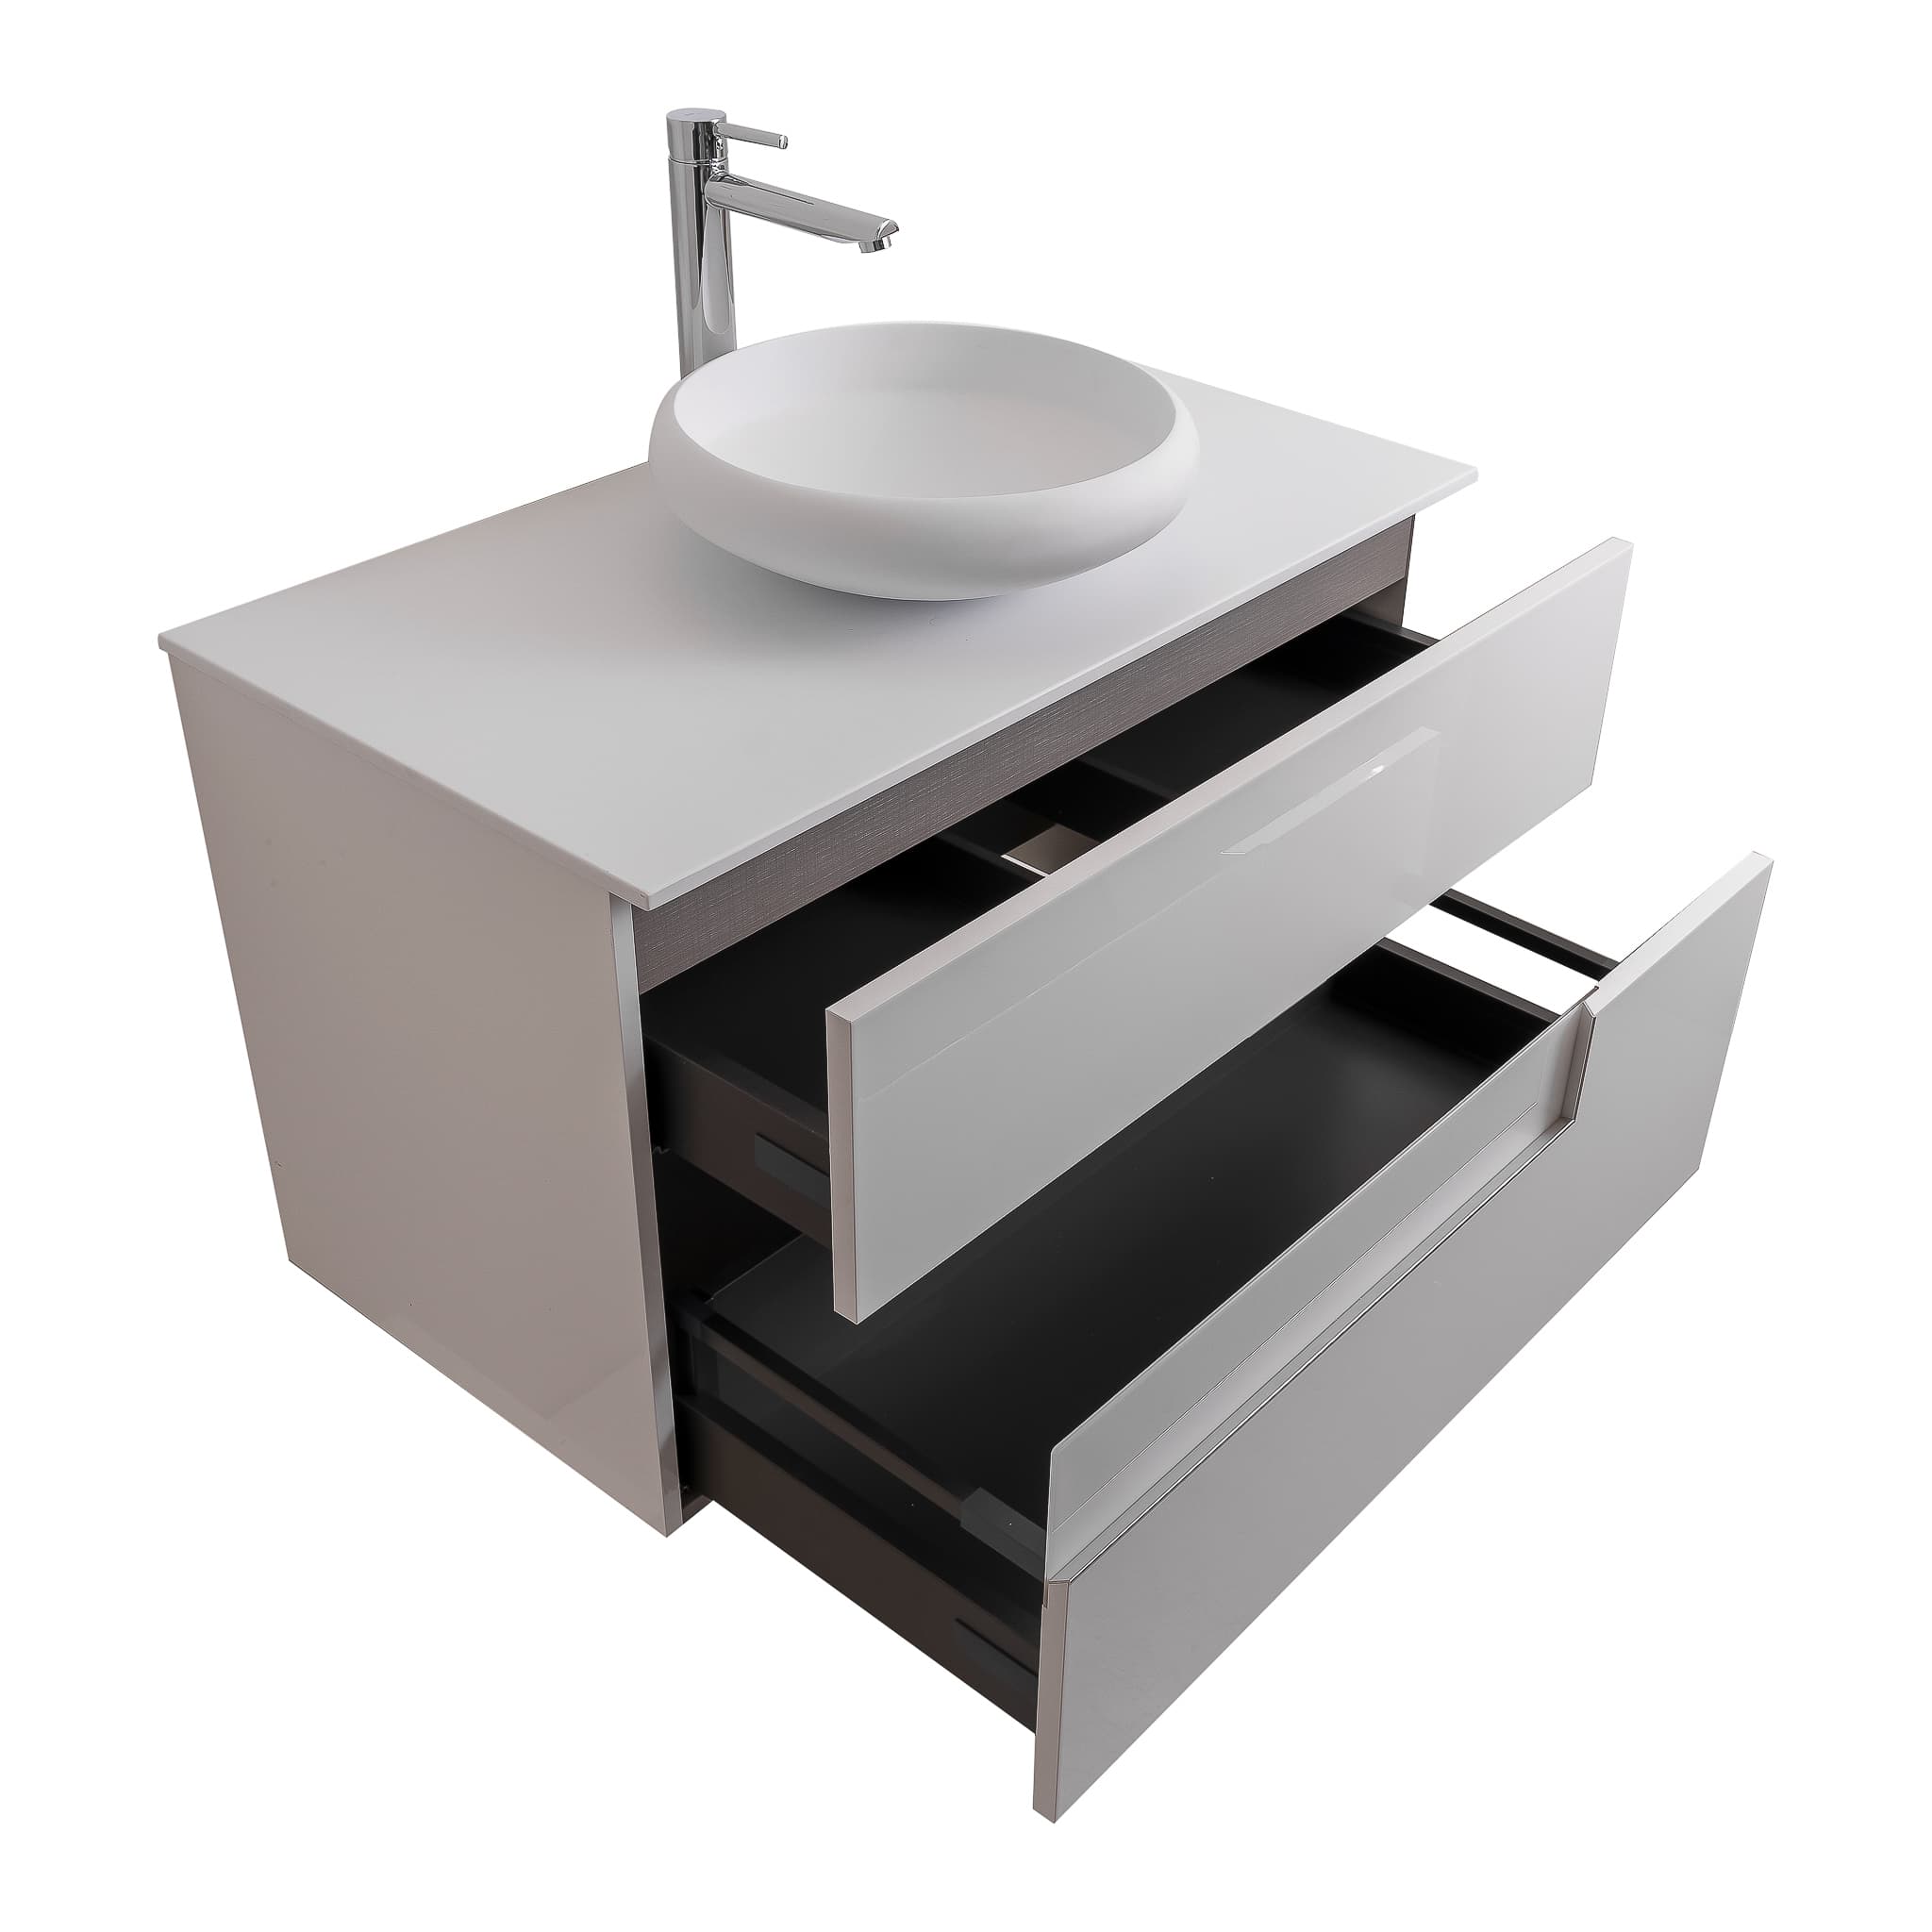 Vision 31.5 White High Gloss Cabinet, Solid Surface Flat White Counter And Round Solid Surface White Basin 1153, Wall Mounted Modern Vanity Set